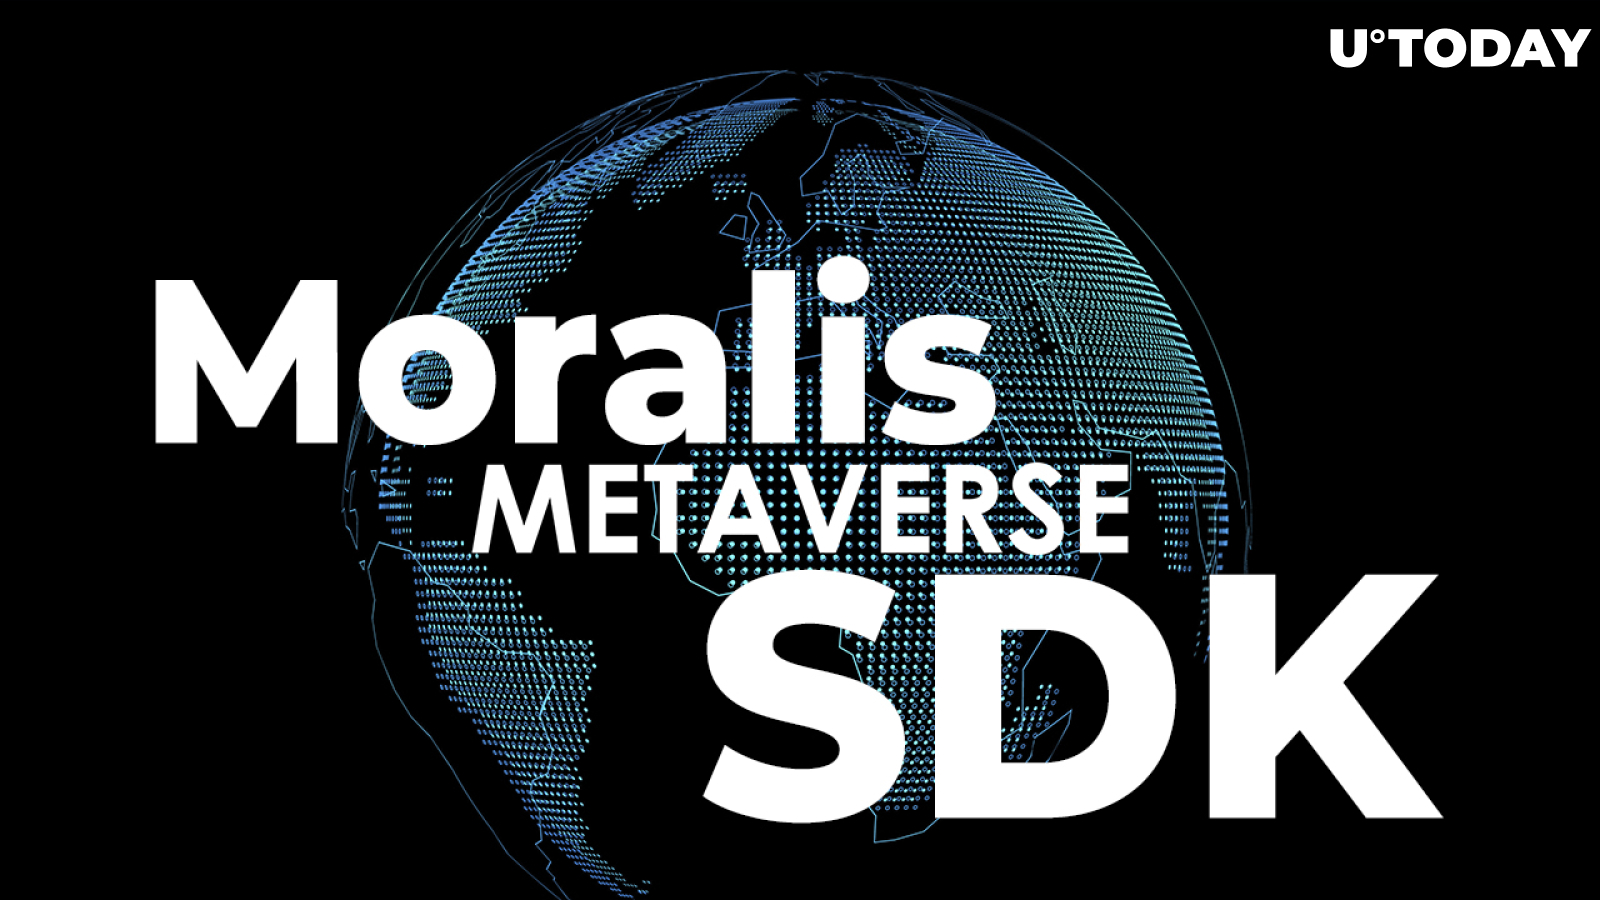 Moralis Releases Powerful SDK to Amp Up Metaverse Development Process